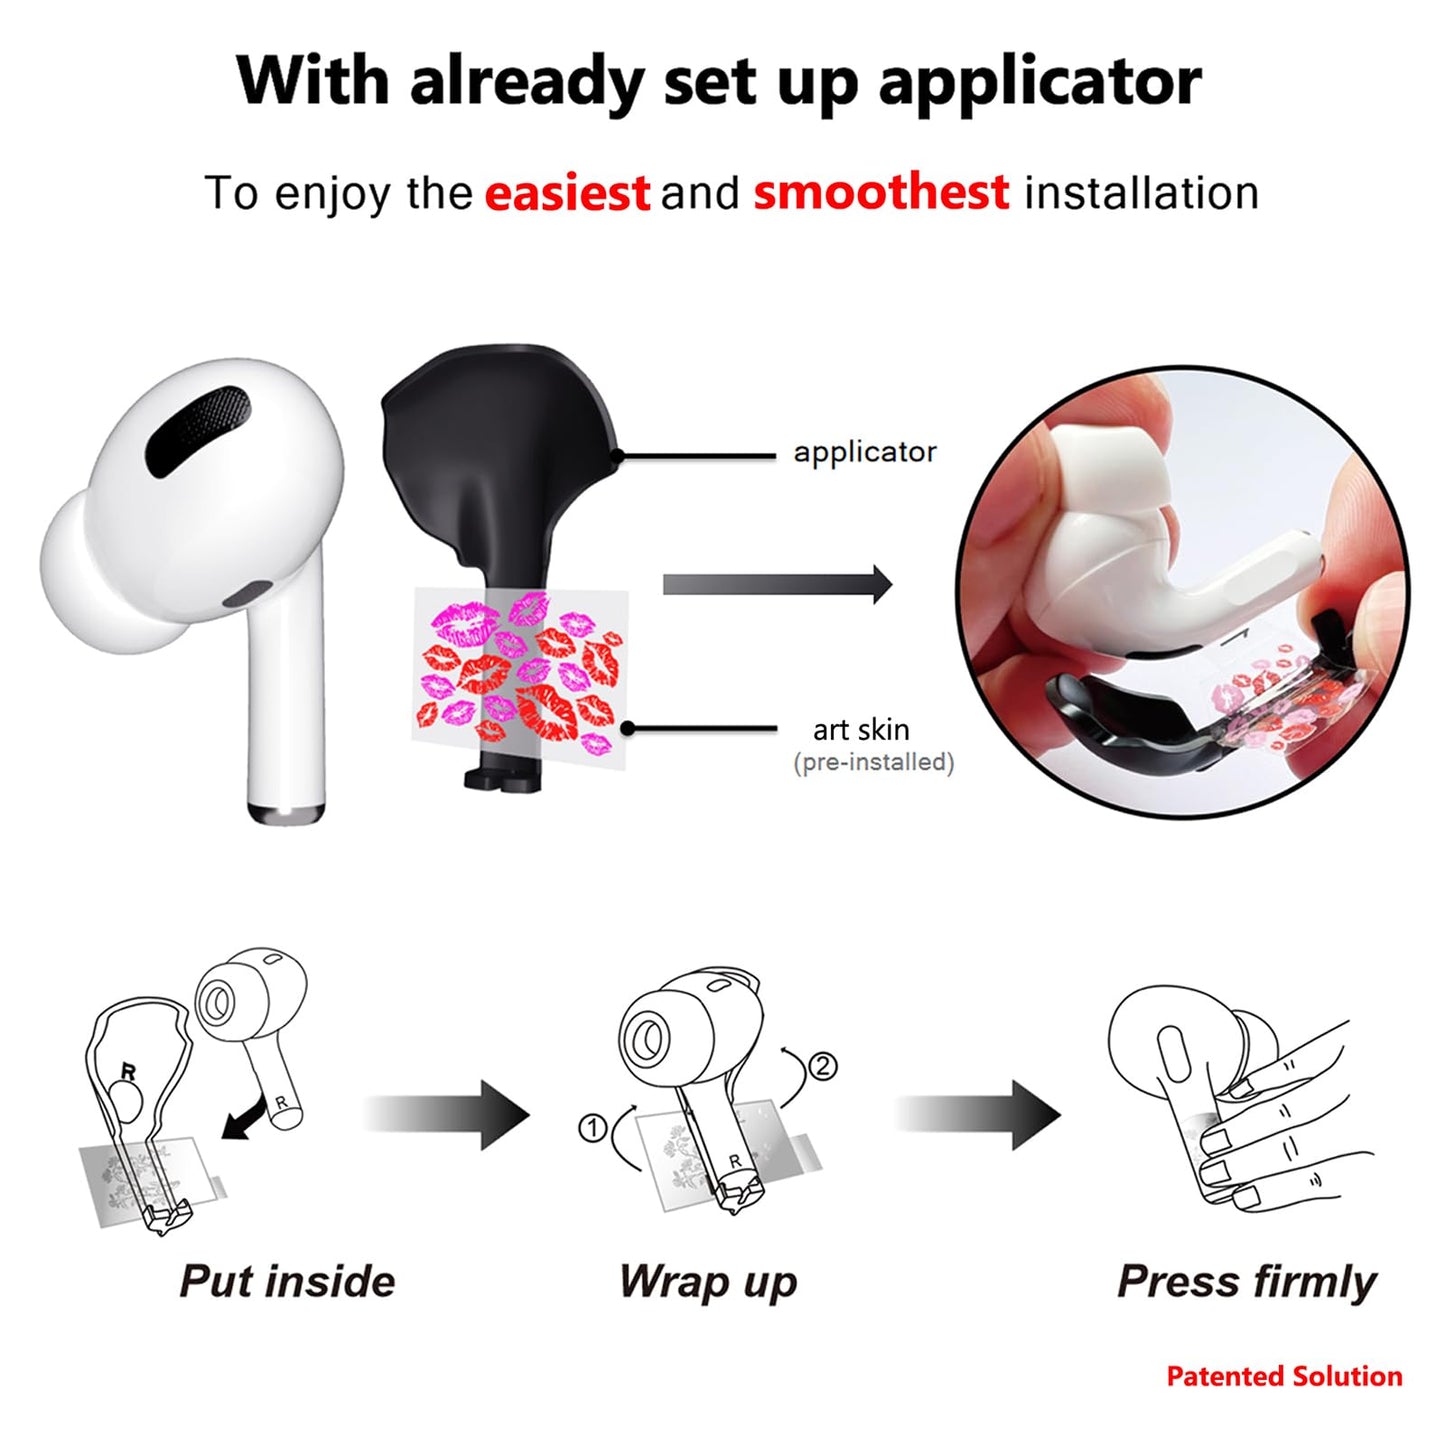 ROCKMAX for Pink AirPods Pro Skin Accessories, Bubble Gum Wink Girl Sticker Wrap for Women and Teens, Thin Tattoos Compatible to AirPods Pro 2 Case Cover, Fashion Decal with Cleaning Kit